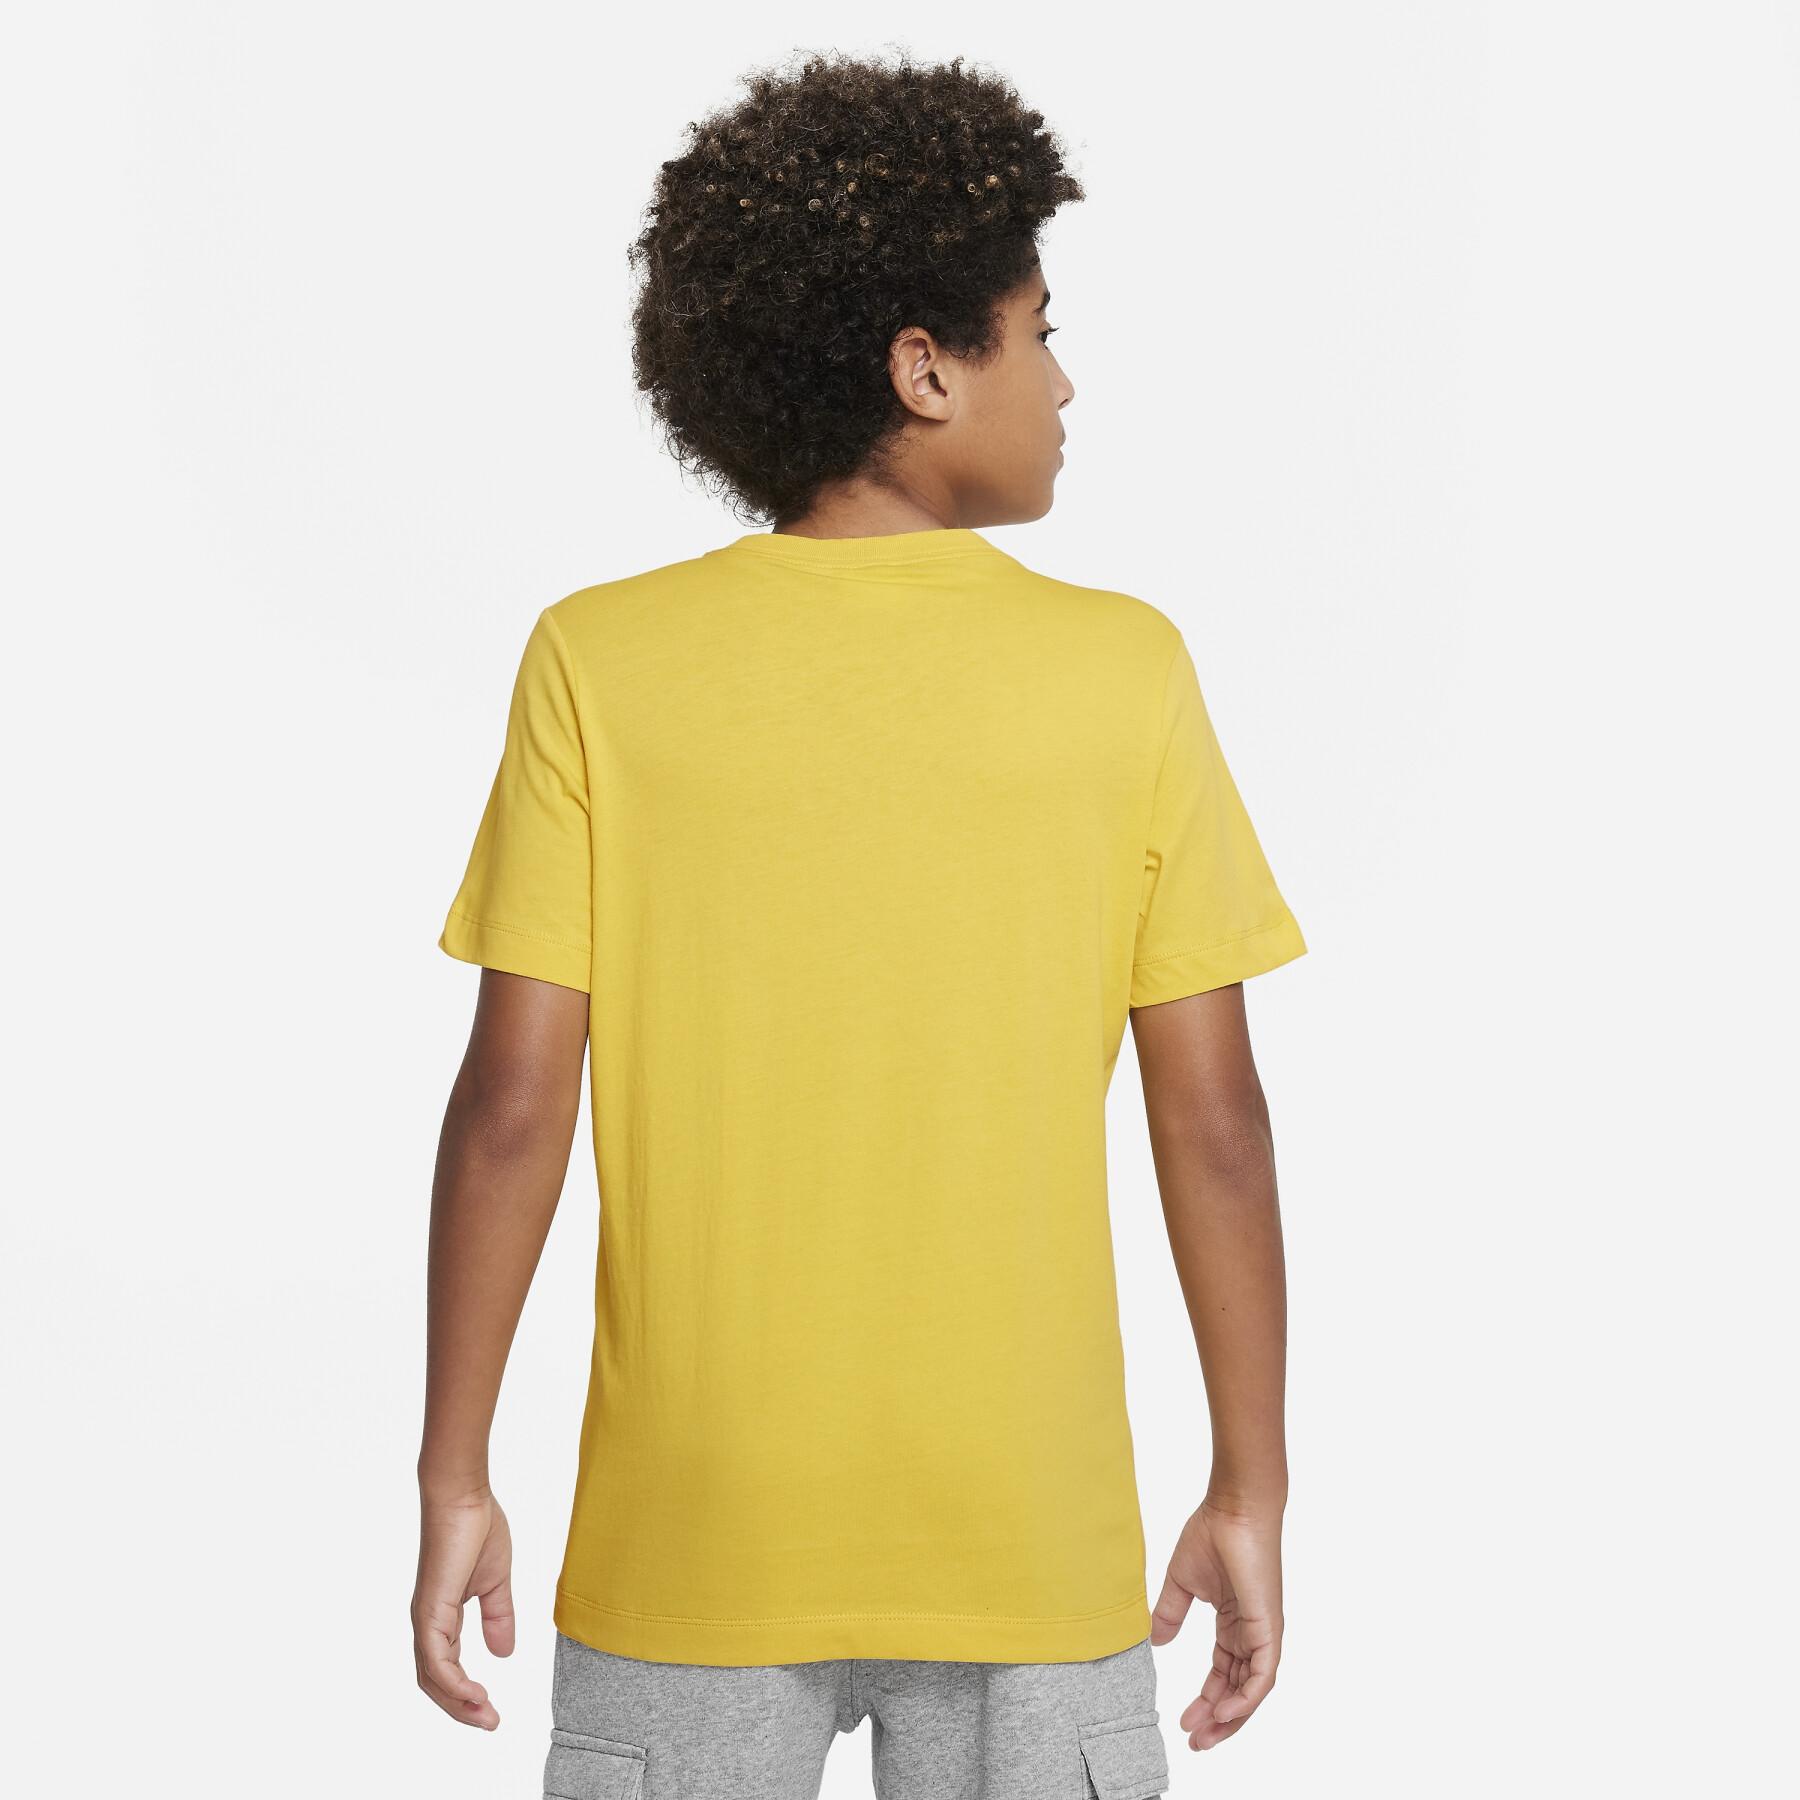 Child's T-shirt Nike Standard Issue